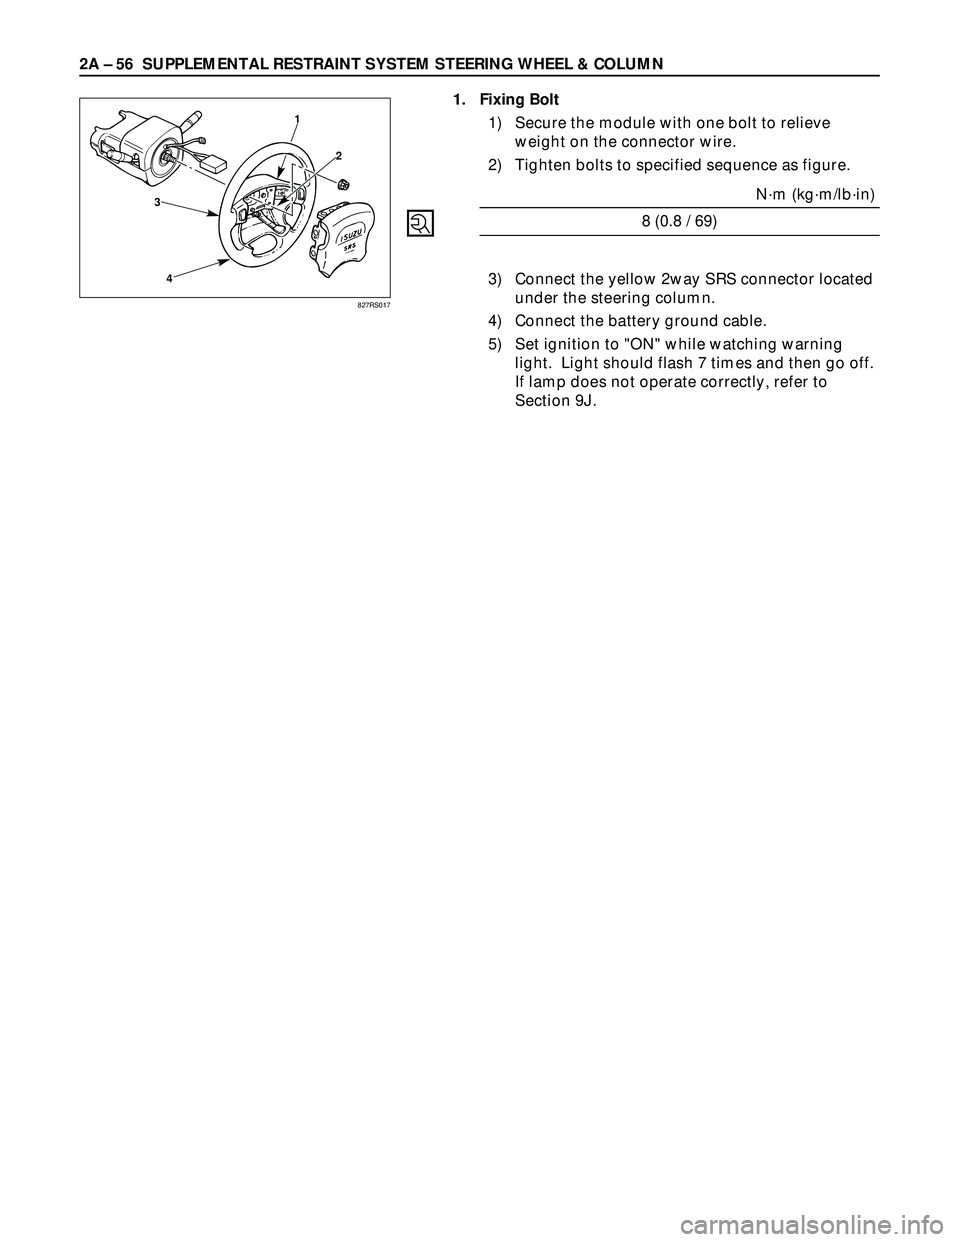 ISUZU TROOPER 1998  Service Repair Manual 2A – 56 SUPPLEMENTAL RESTRAINT SYSTEM STEERING WHEEL & COLUMN
3
41
2
1. Fixing Bolt
1) Secure the module with one bolt to relieve
weight on the connector wire.
2) Tighten bolts to specified sequence